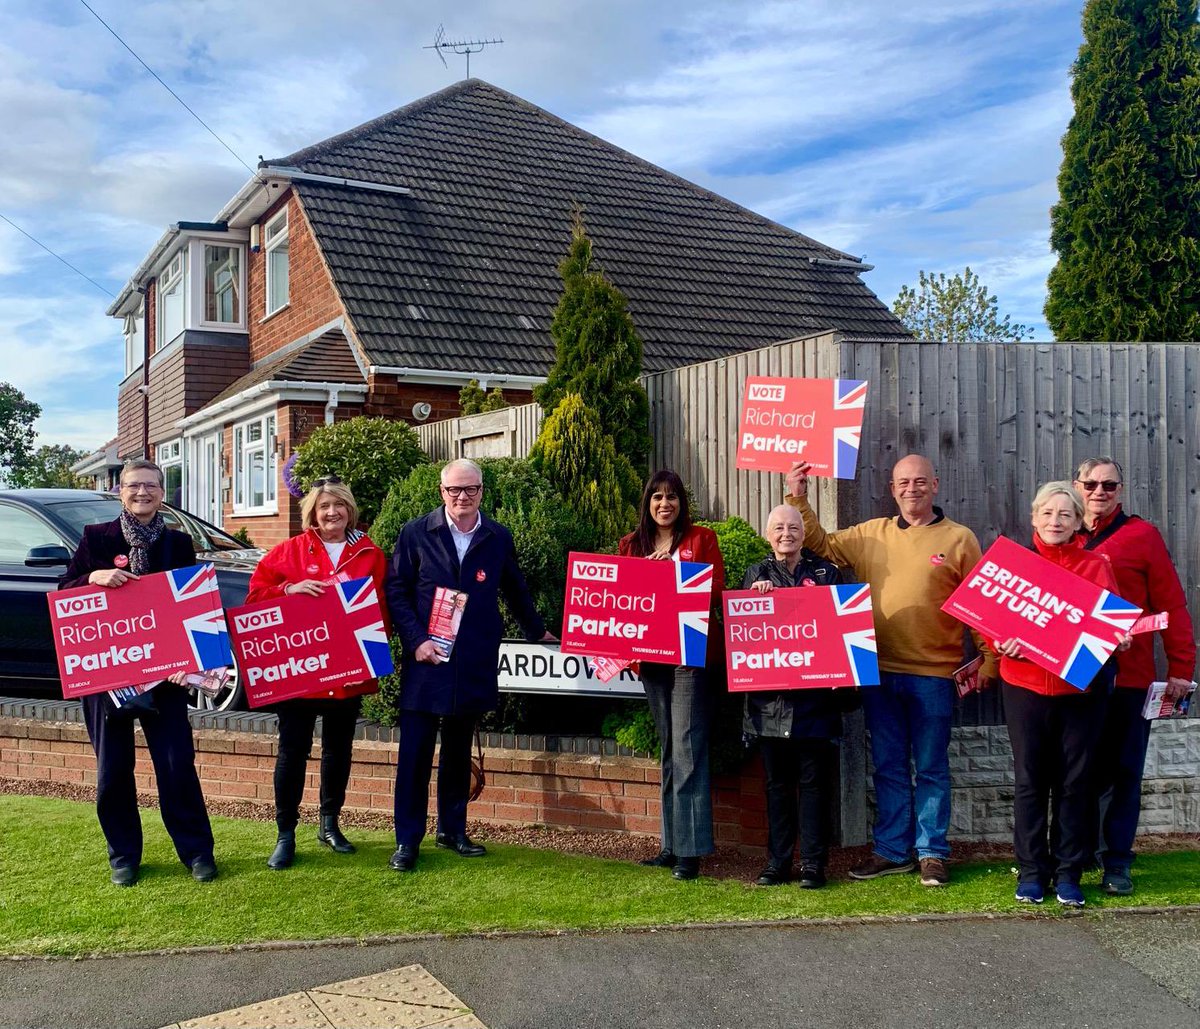 Well we are all waiting with bated breath. Richard Parker went down well in Wednesfield North this week as he campaigned with Mary and I with Labour Party members. Excited! @WulfrunianChris